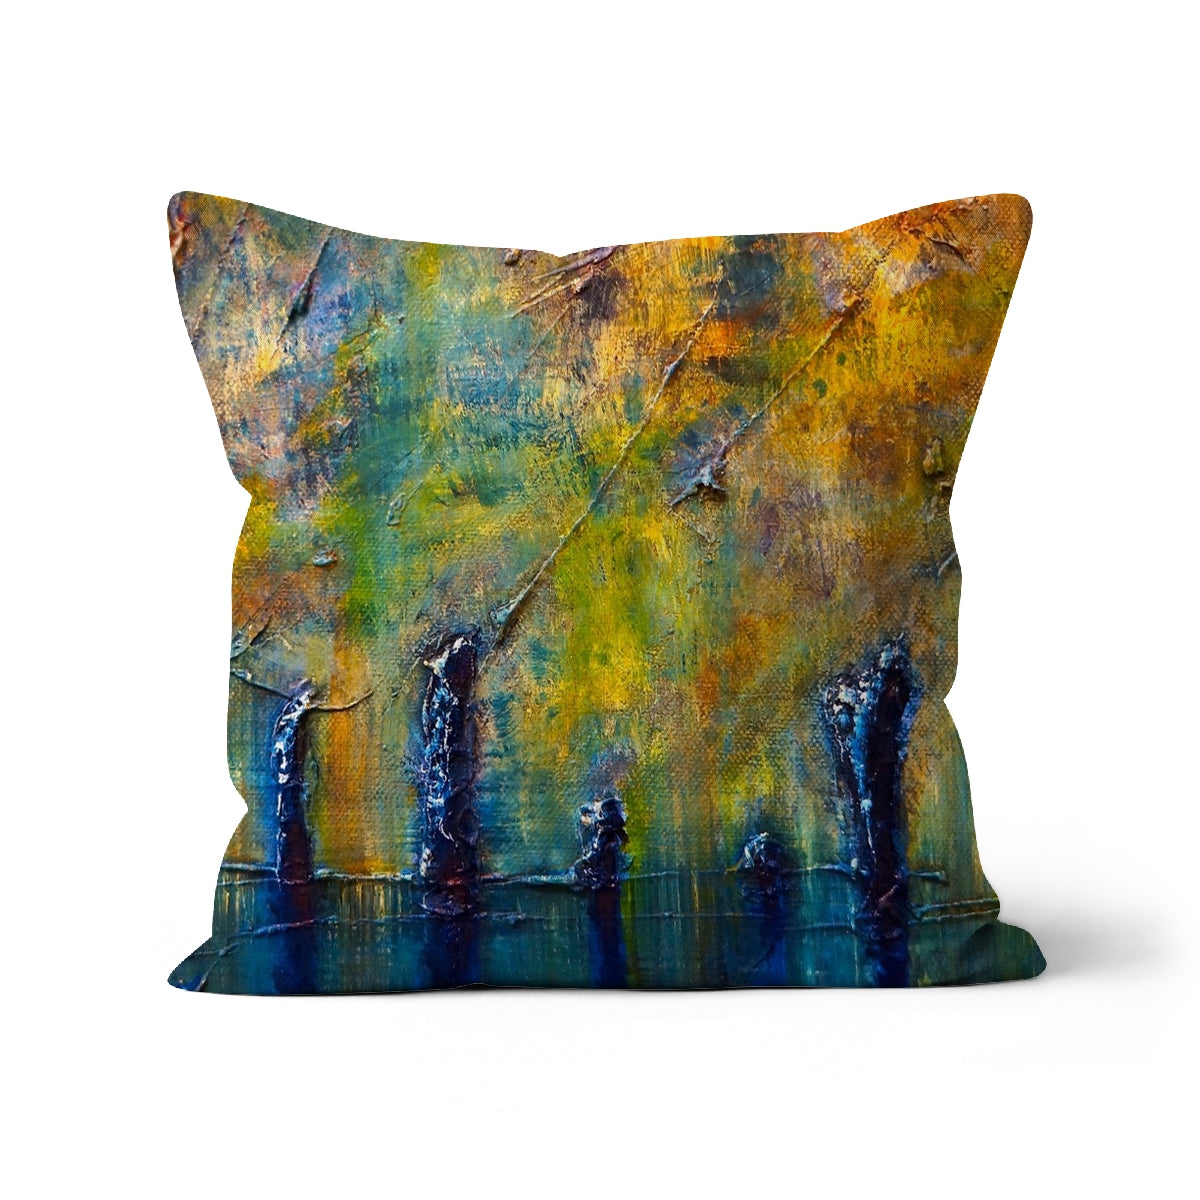 Stenness Moonlight Orkney Art Gifts Cushion-Cushions-Orkney Art Gallery-Faux Suede-16"x16"-Paintings, Prints, Homeware, Art Gifts From Scotland By Scottish Artist Kevin Hunter